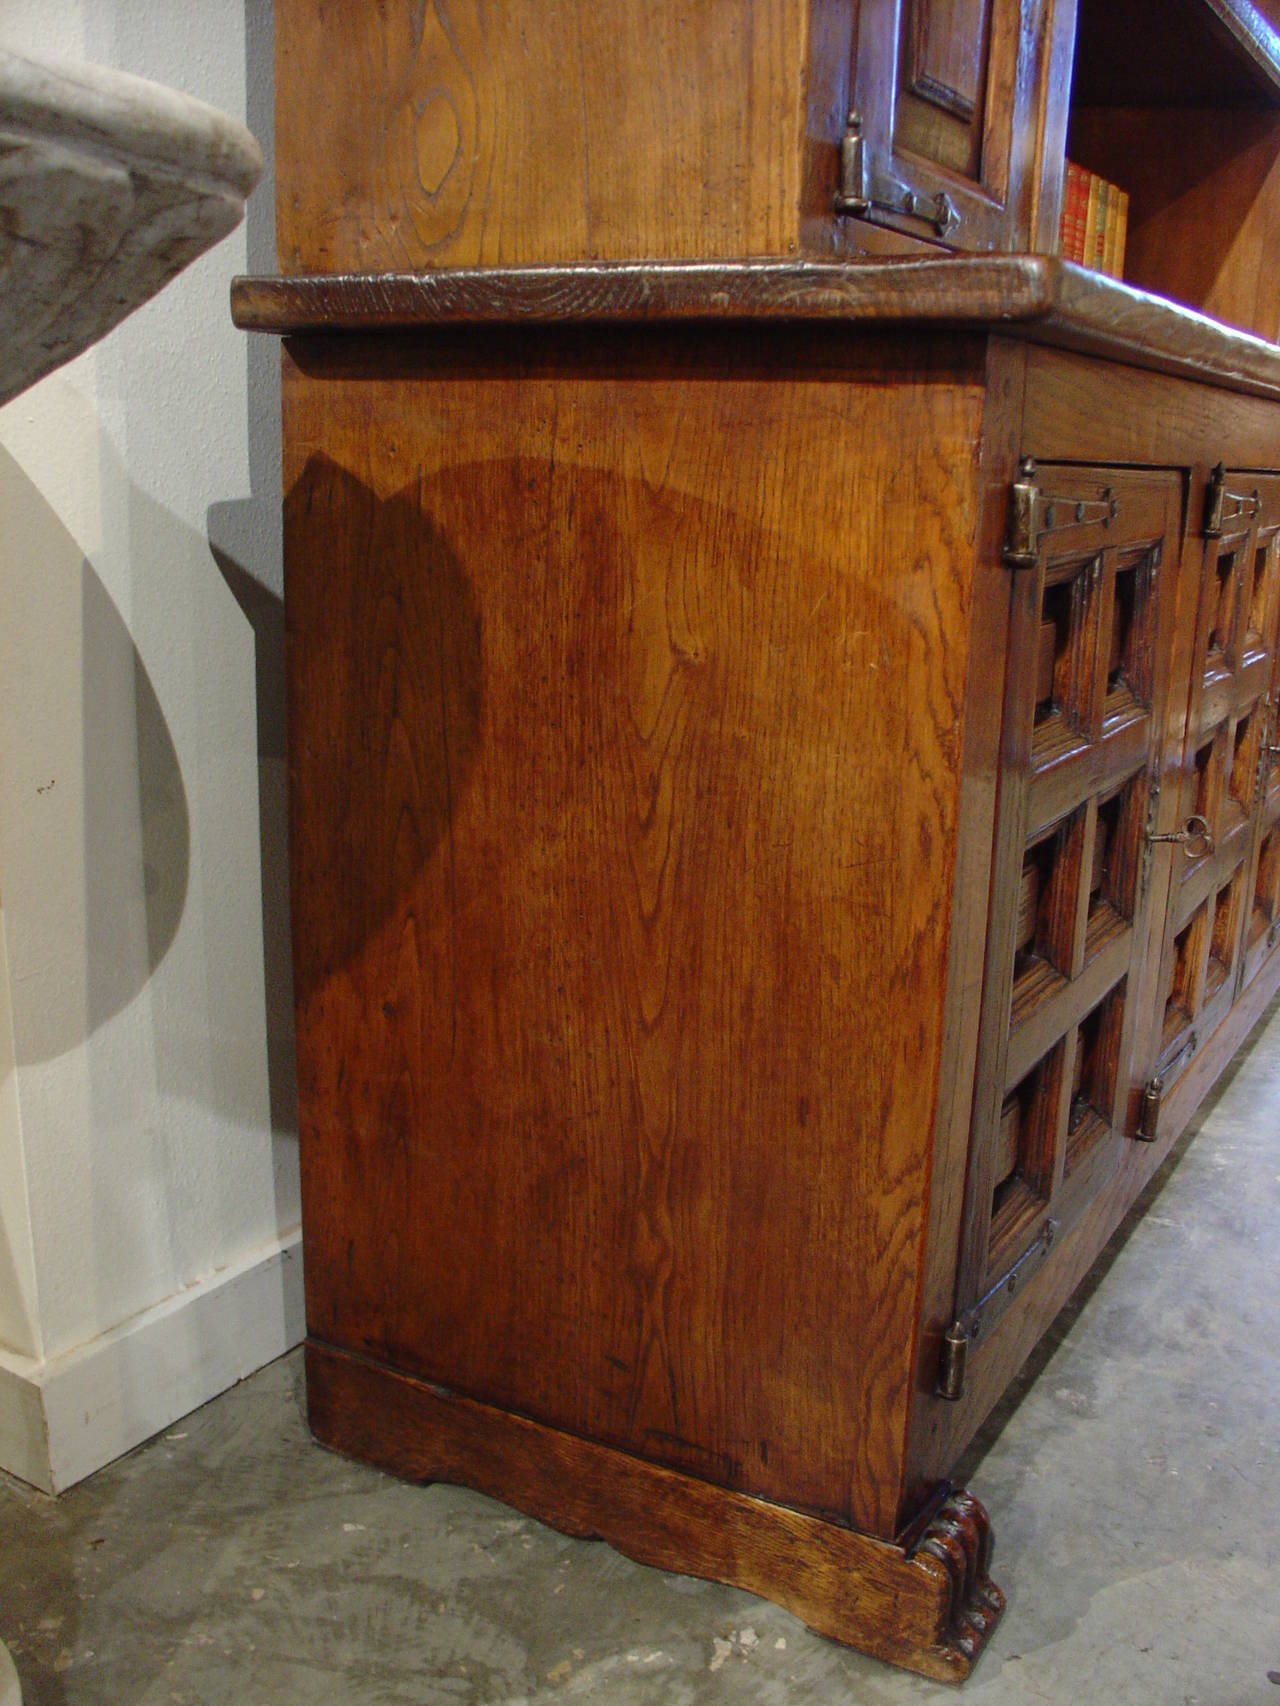 20th Century Large Oak Bookcase with Iron Hardware from Spain, Early 1900s